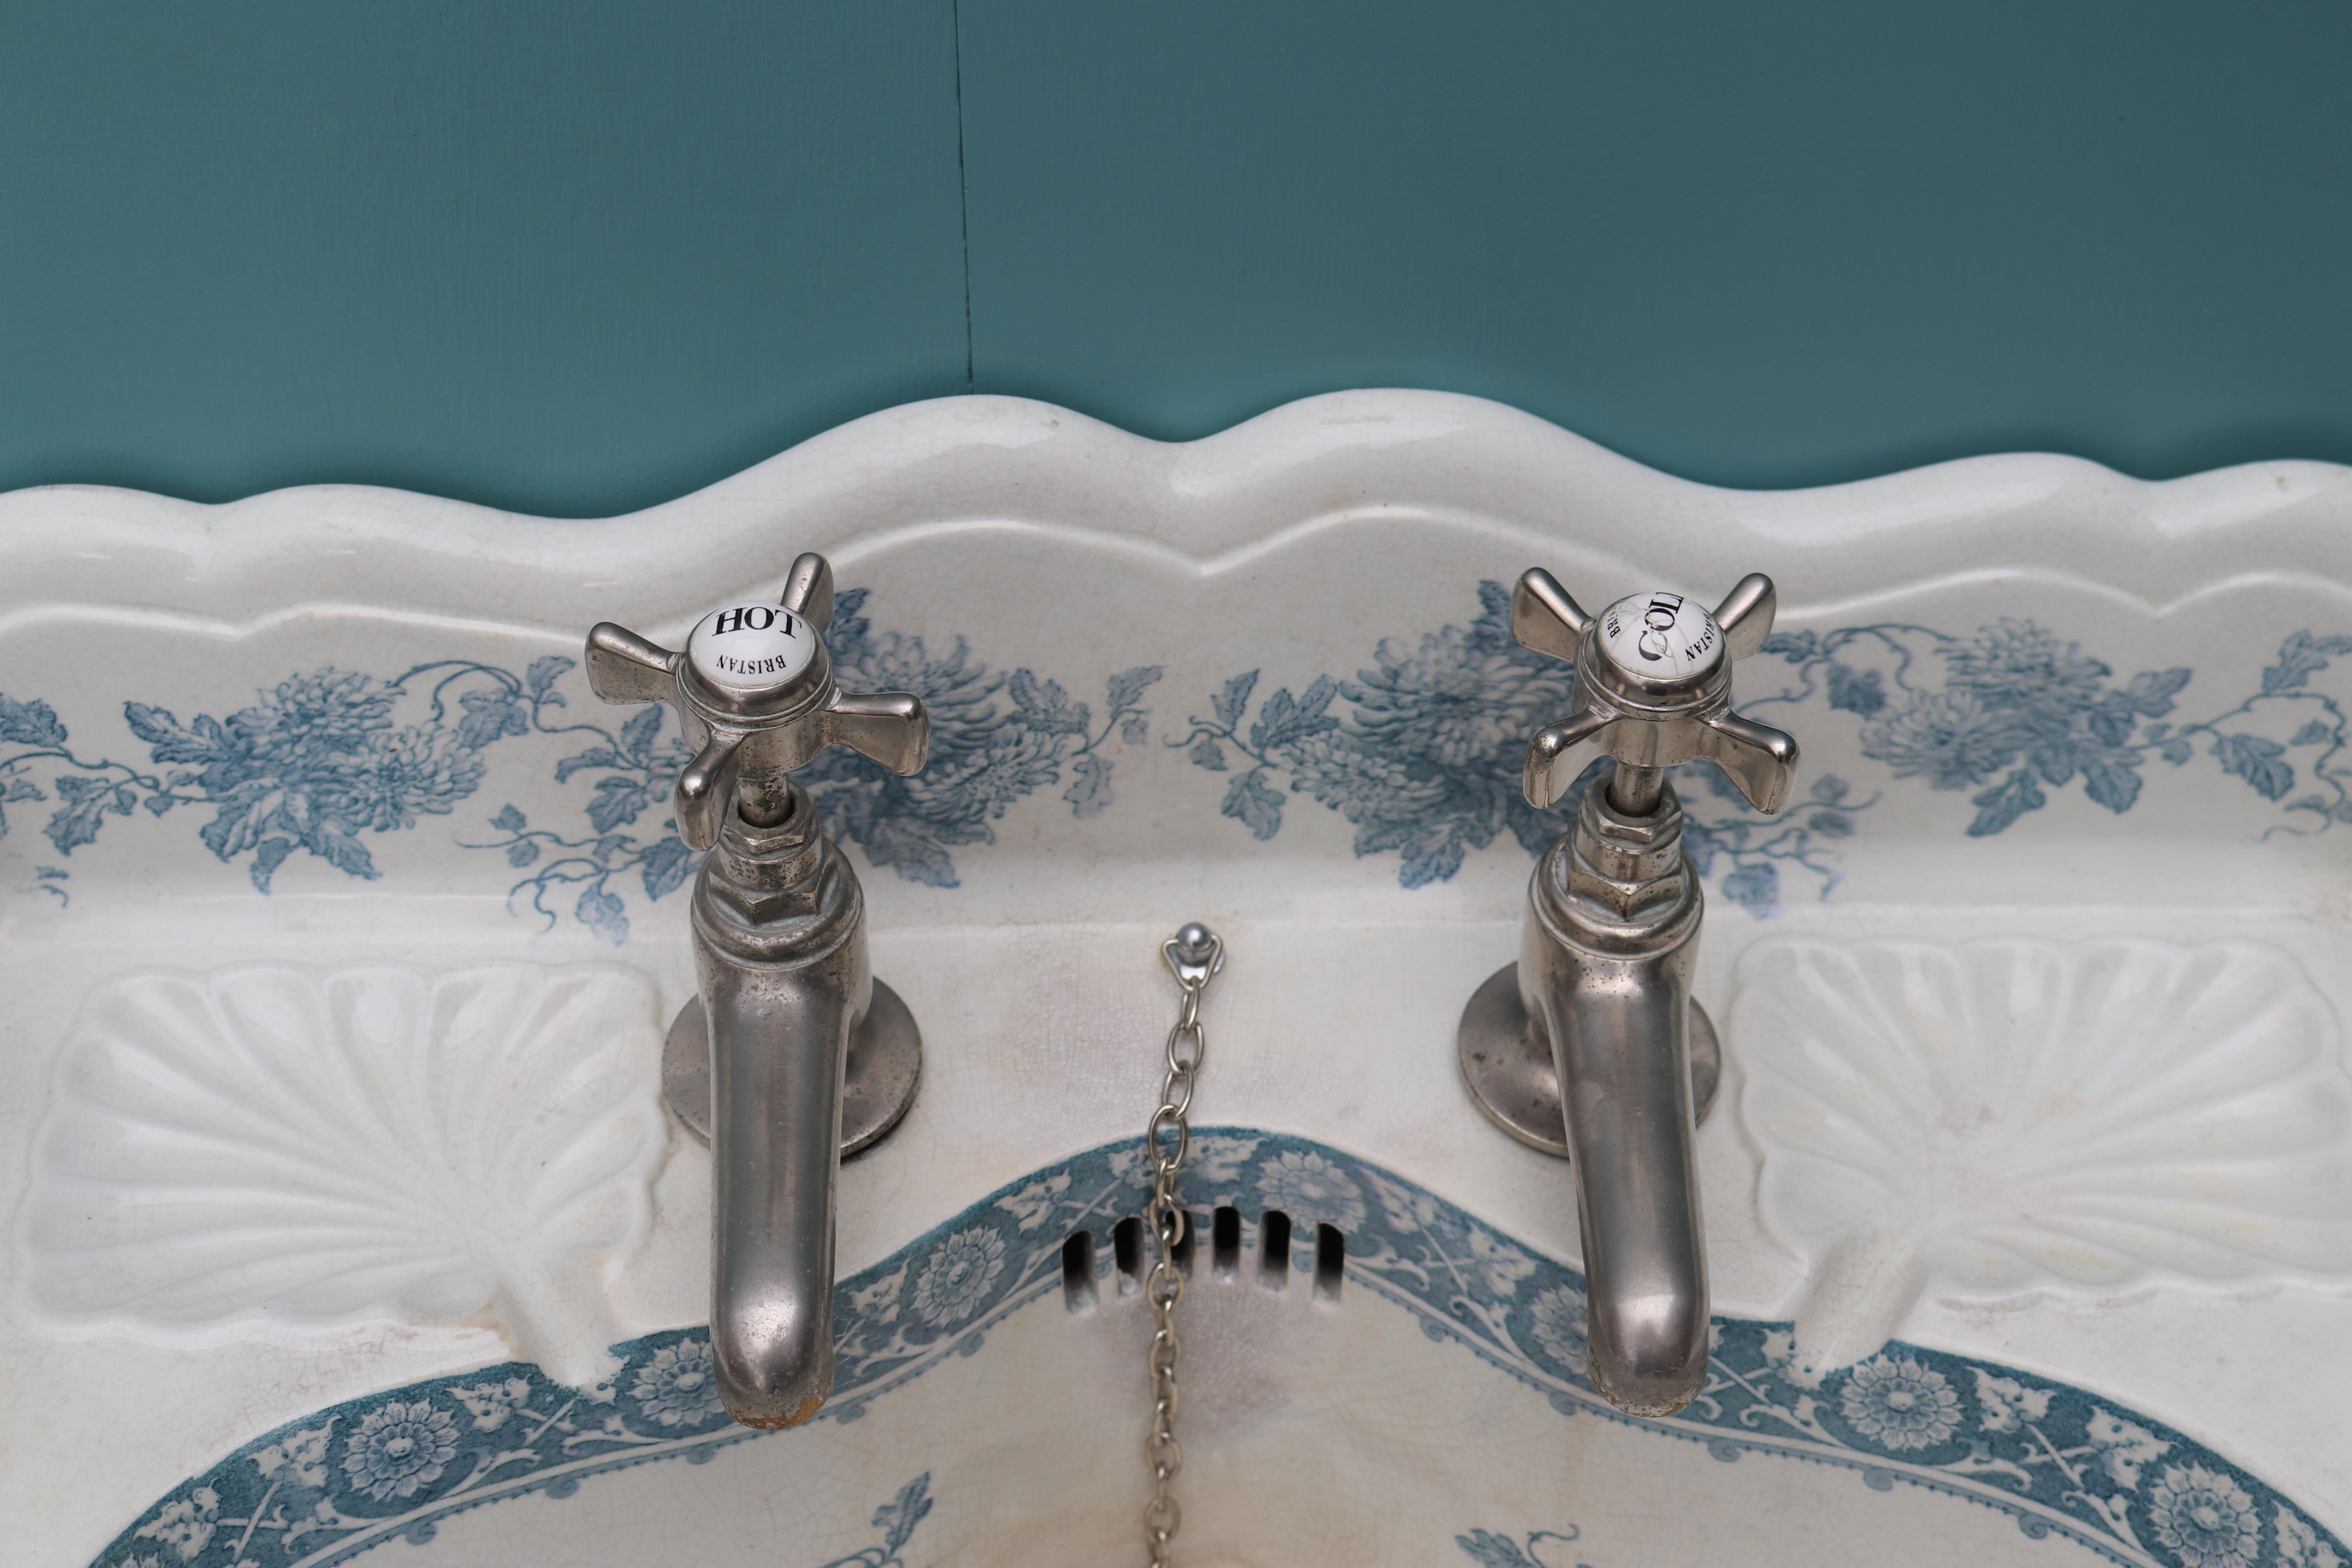 English Antique Victorian Blue and White Patterned Wash Basin